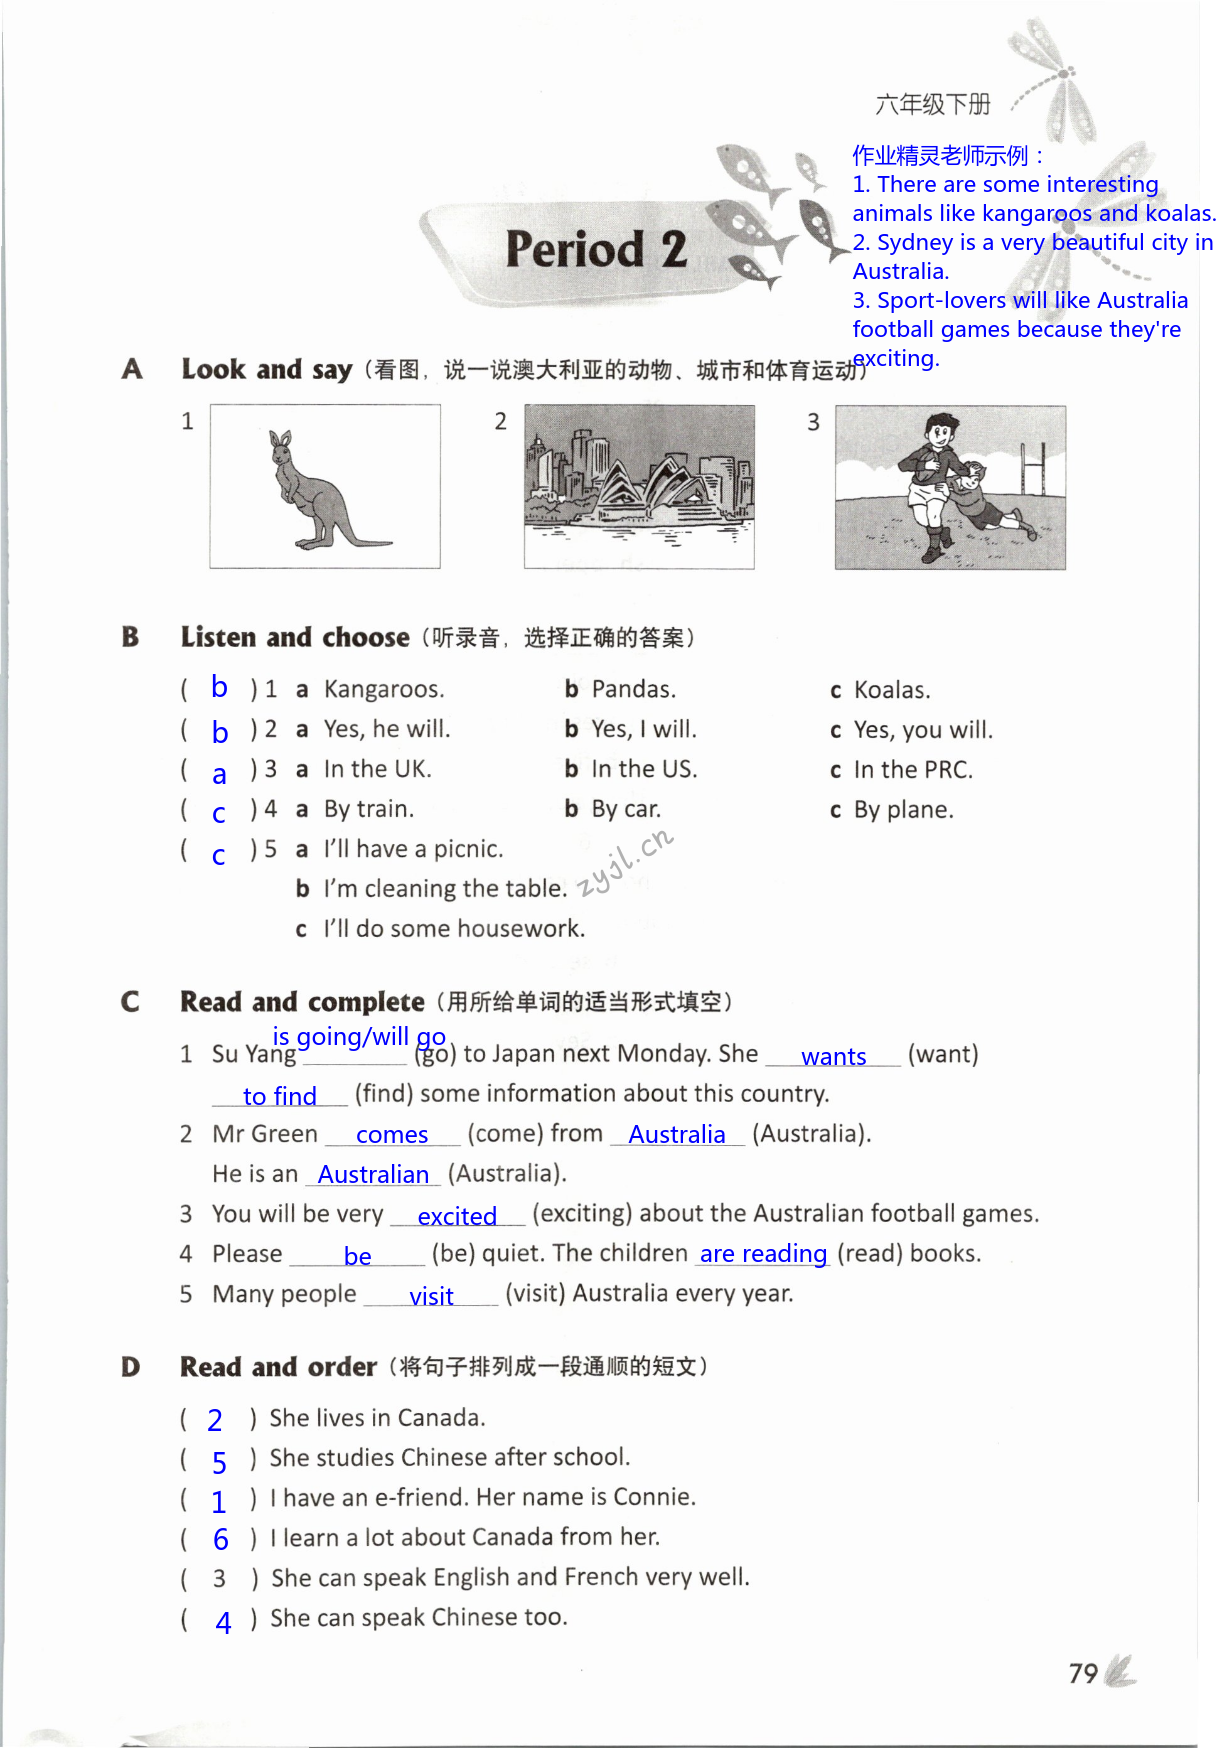 Unit 6 An interesting country - 第79页